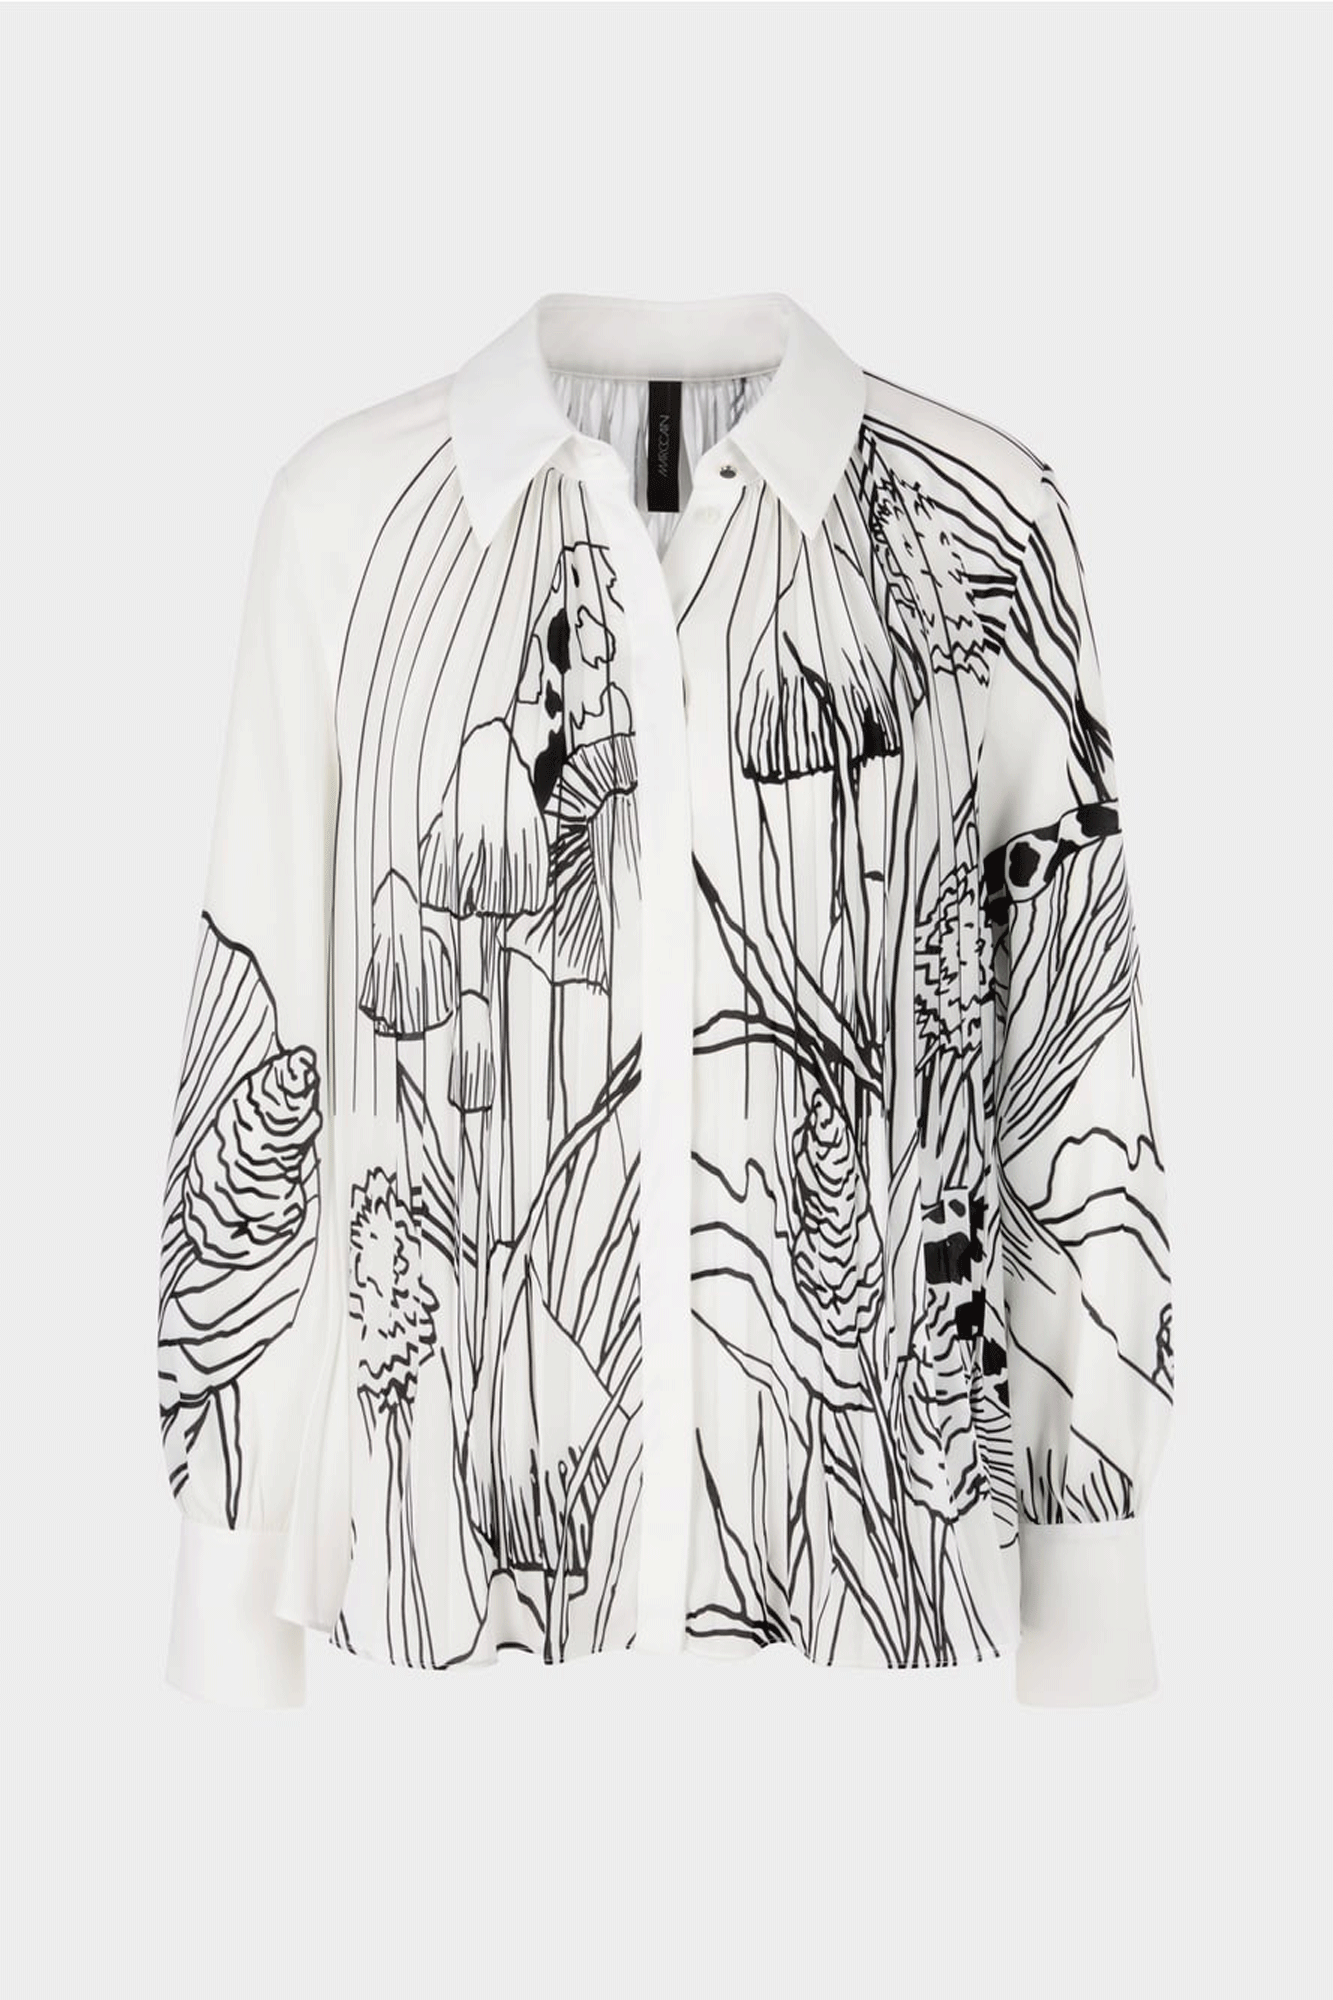 This Graphic Mushroom Blouse from Marc Cain is crafted with care from recycled polyester. Its pleats start at the collar and open to the hem, creating an asymmetrical motif. It carries the "Rethink Together" sustainability label. Perfect for a stylish and sustainable look.